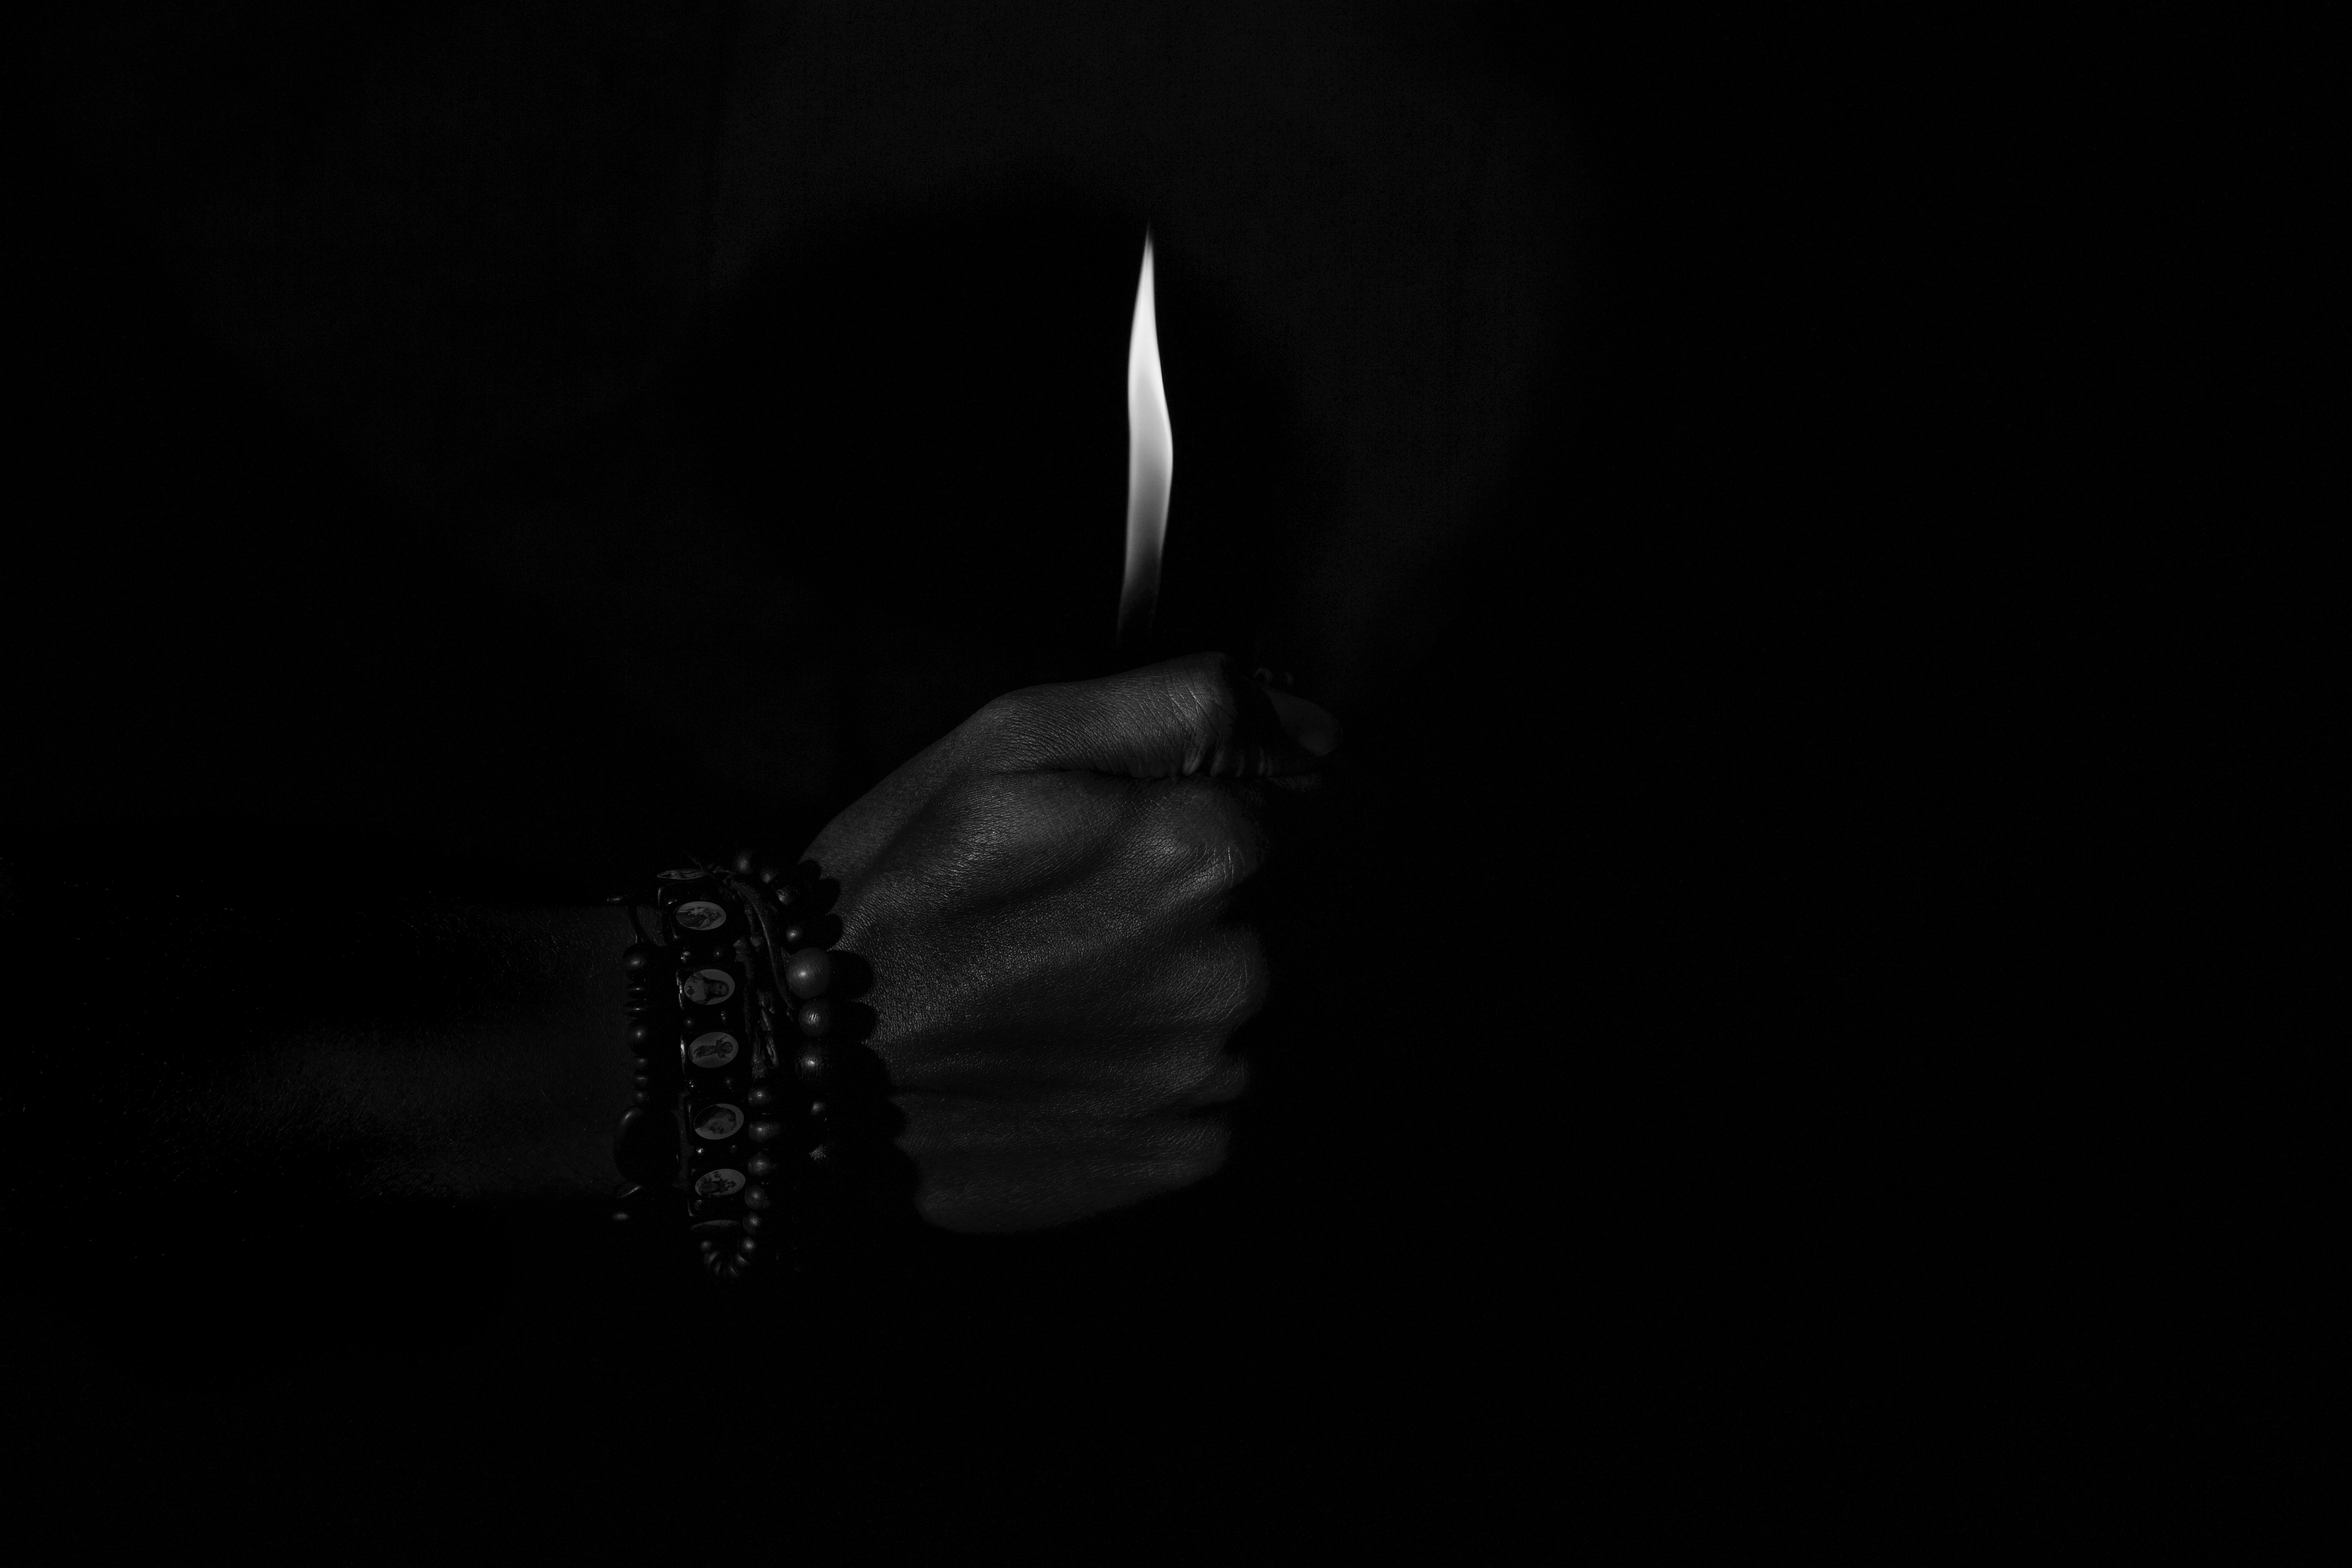 candle, hands, chb, bw, black